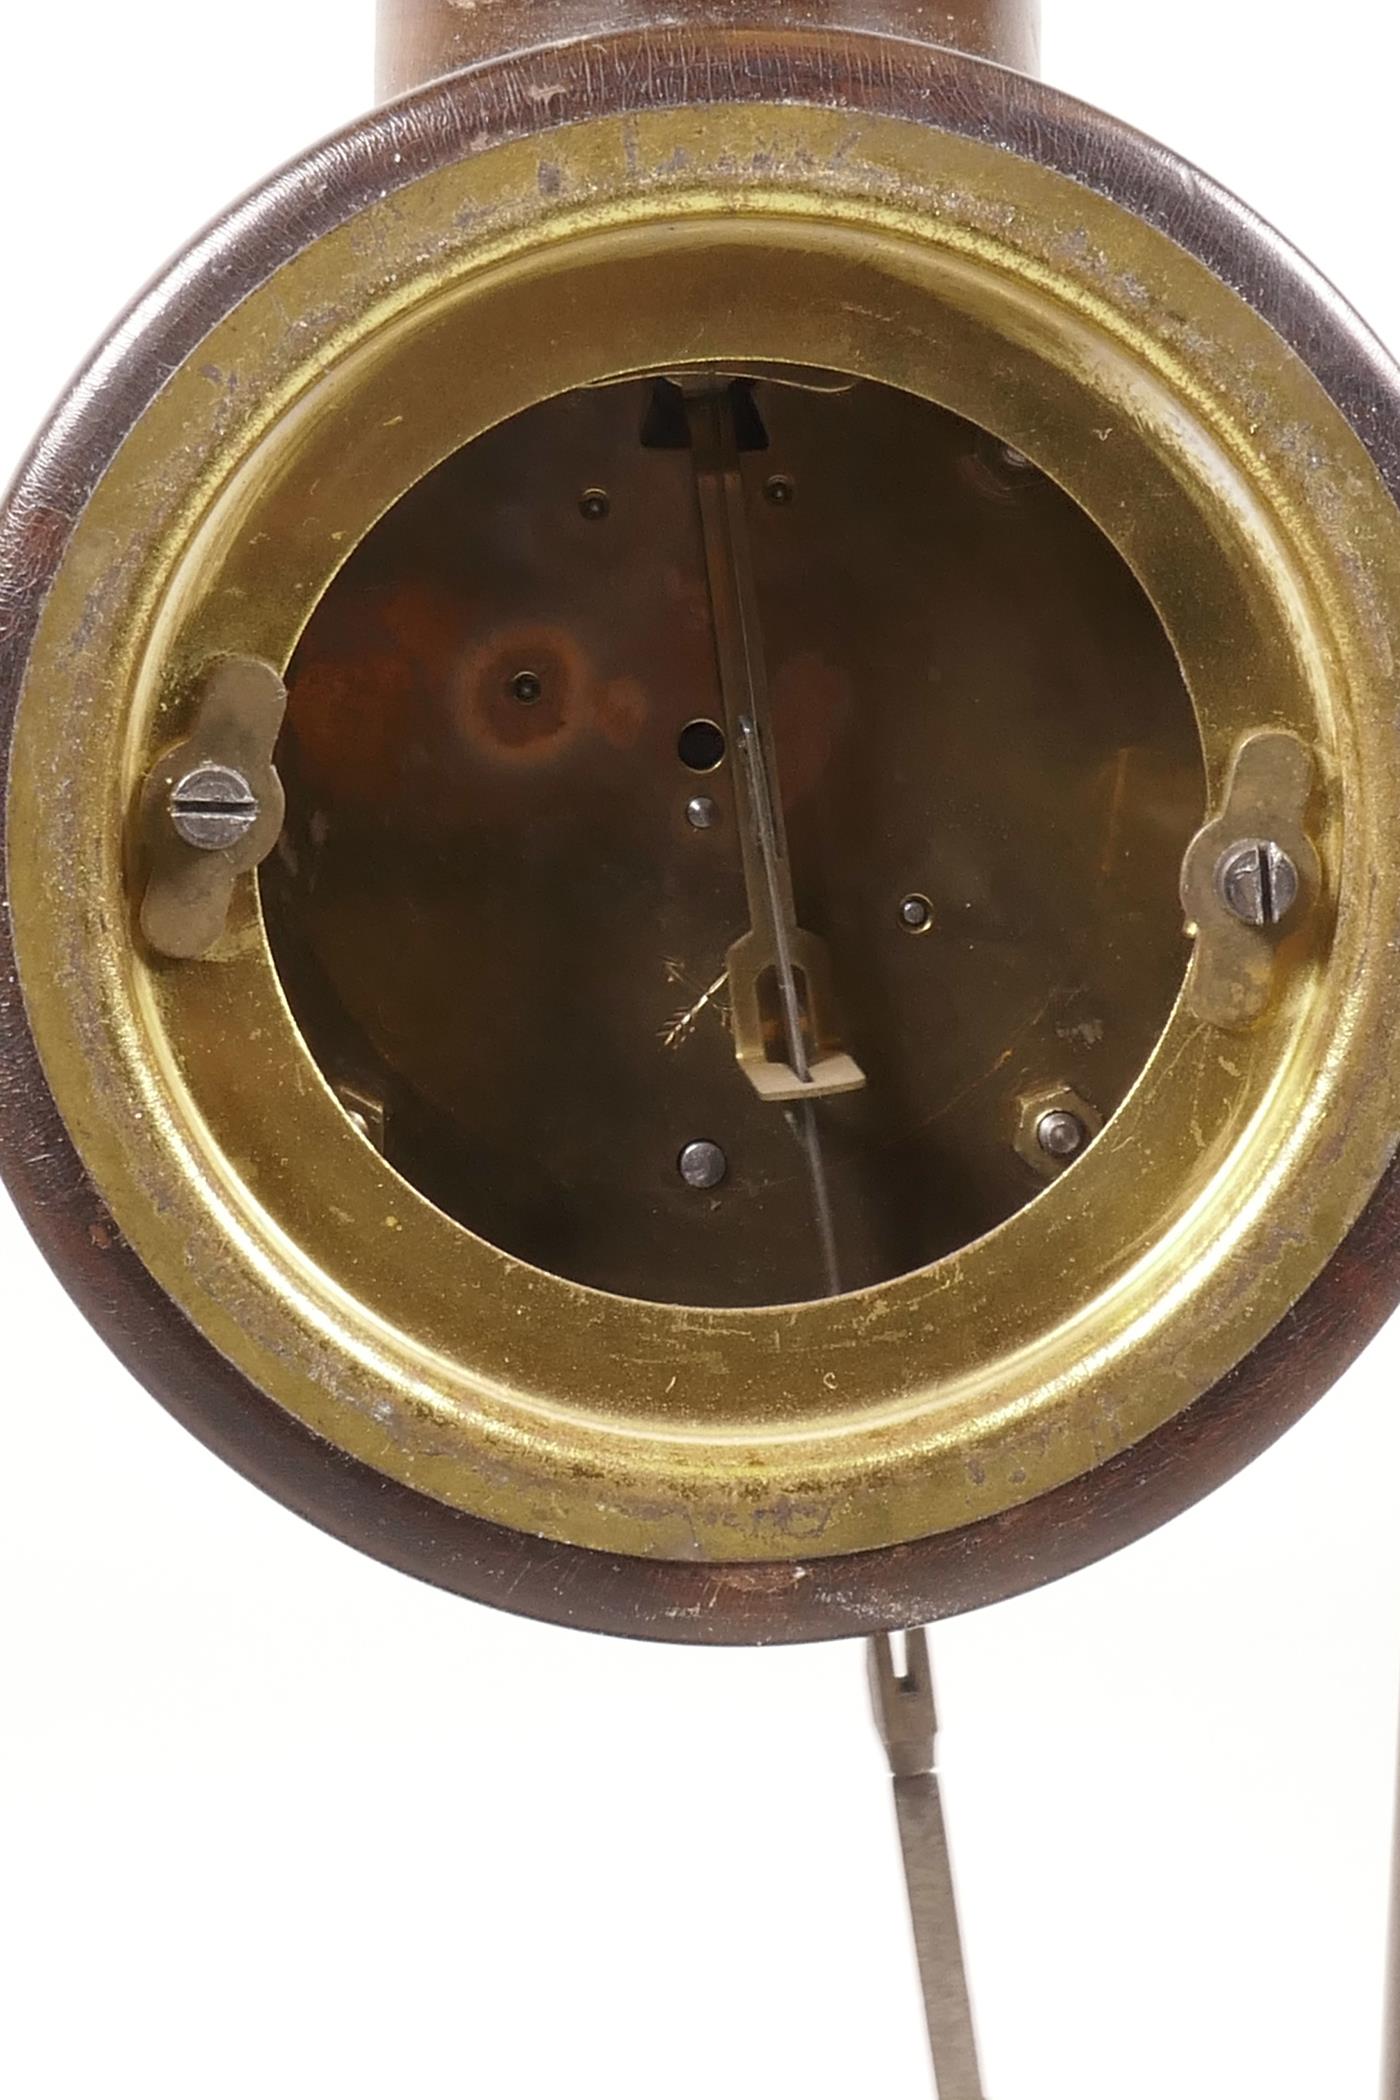 An early C20th French mahogany portico clock, the circular movement raised on six turned columns - Image 3 of 3